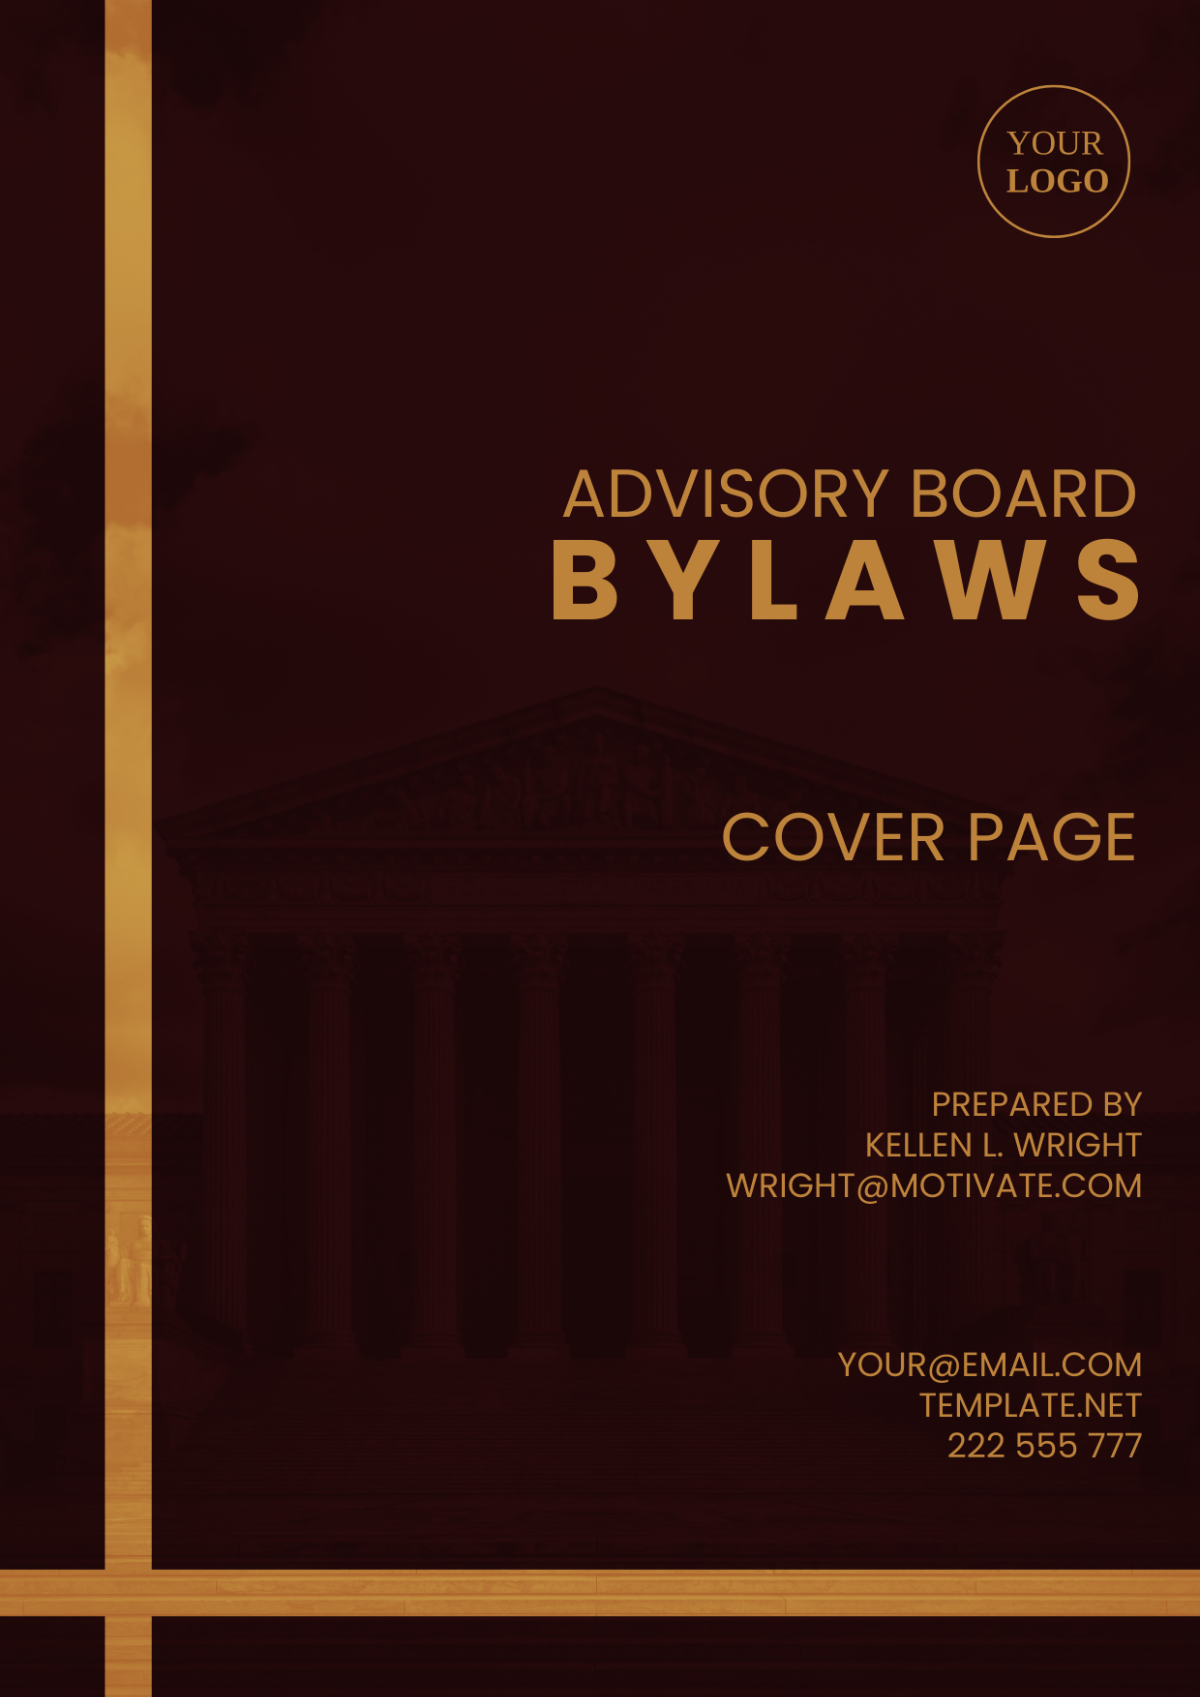 Advisory Board Bylaws Cover Page